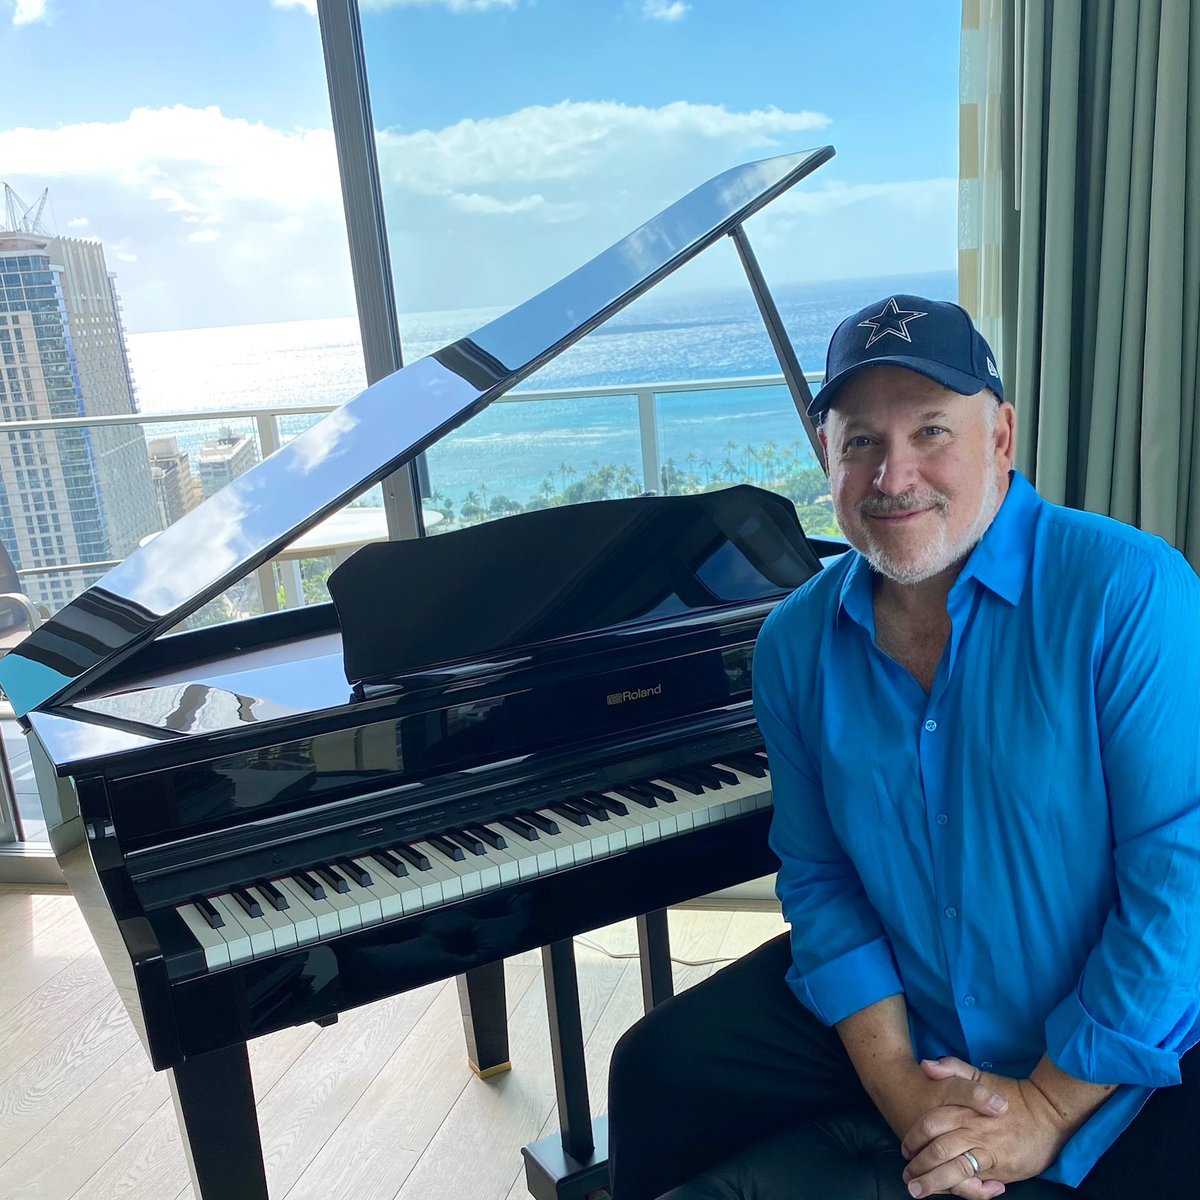 Frank Wildhorn was captured in a smiley face wearing black cap and blue shirt with a harmonium in front of him